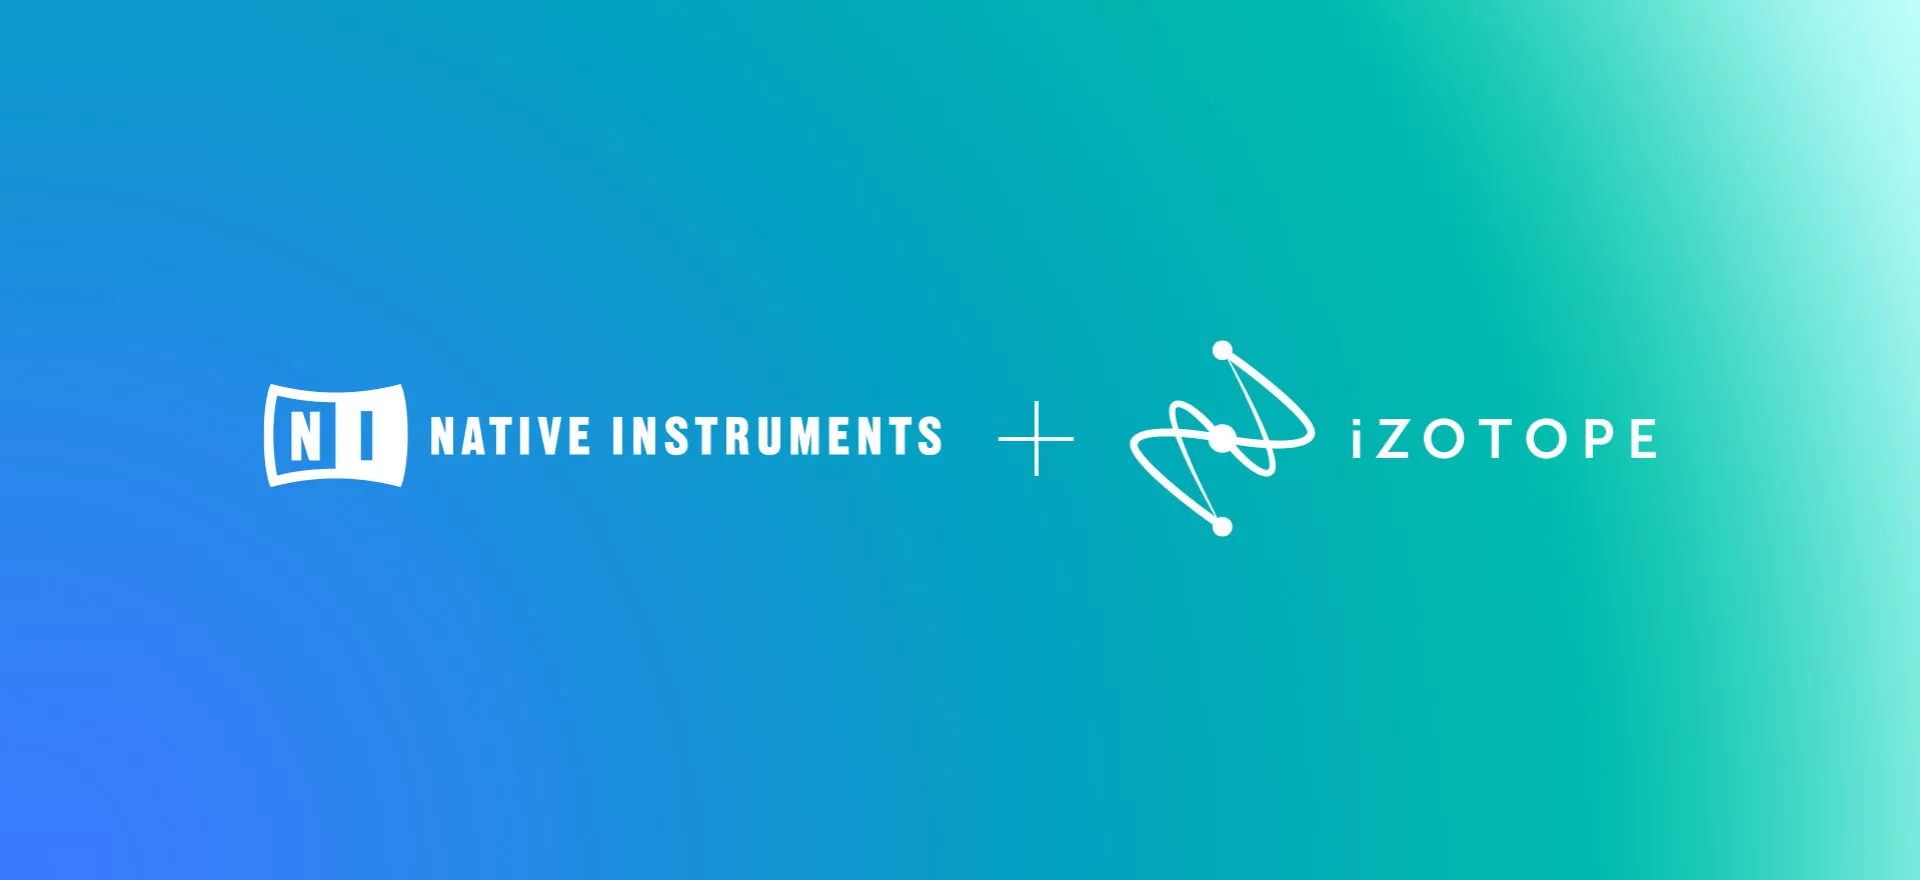 Get free plugins from dream team iZotope and Native Instruments